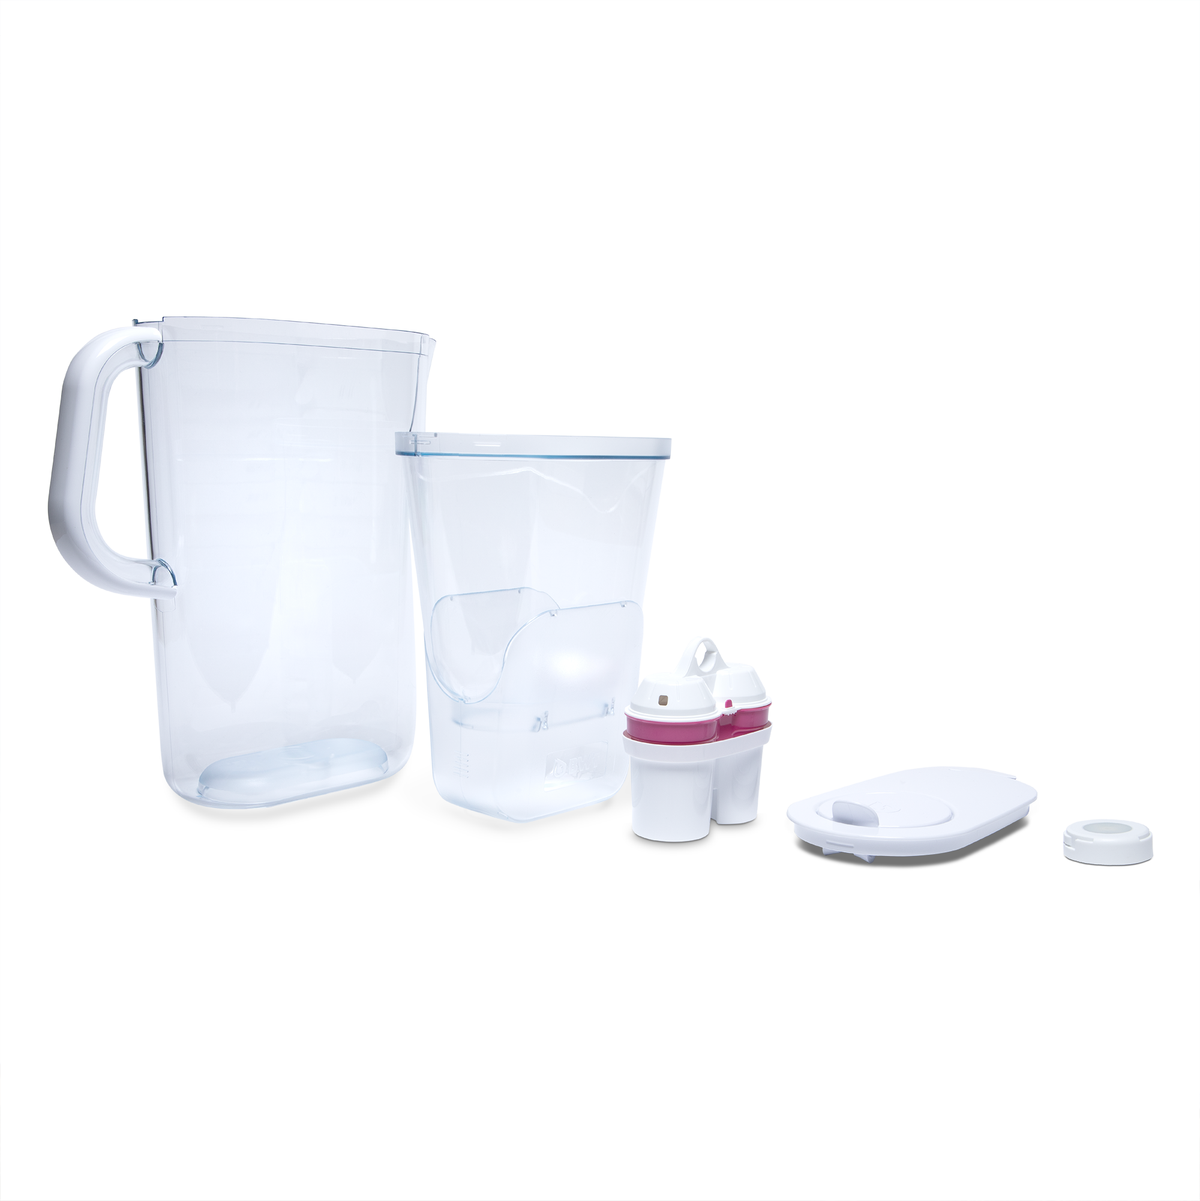 The Pitcher Method: Storing Breast Milk in a Pitcher - Exclusive Pumping